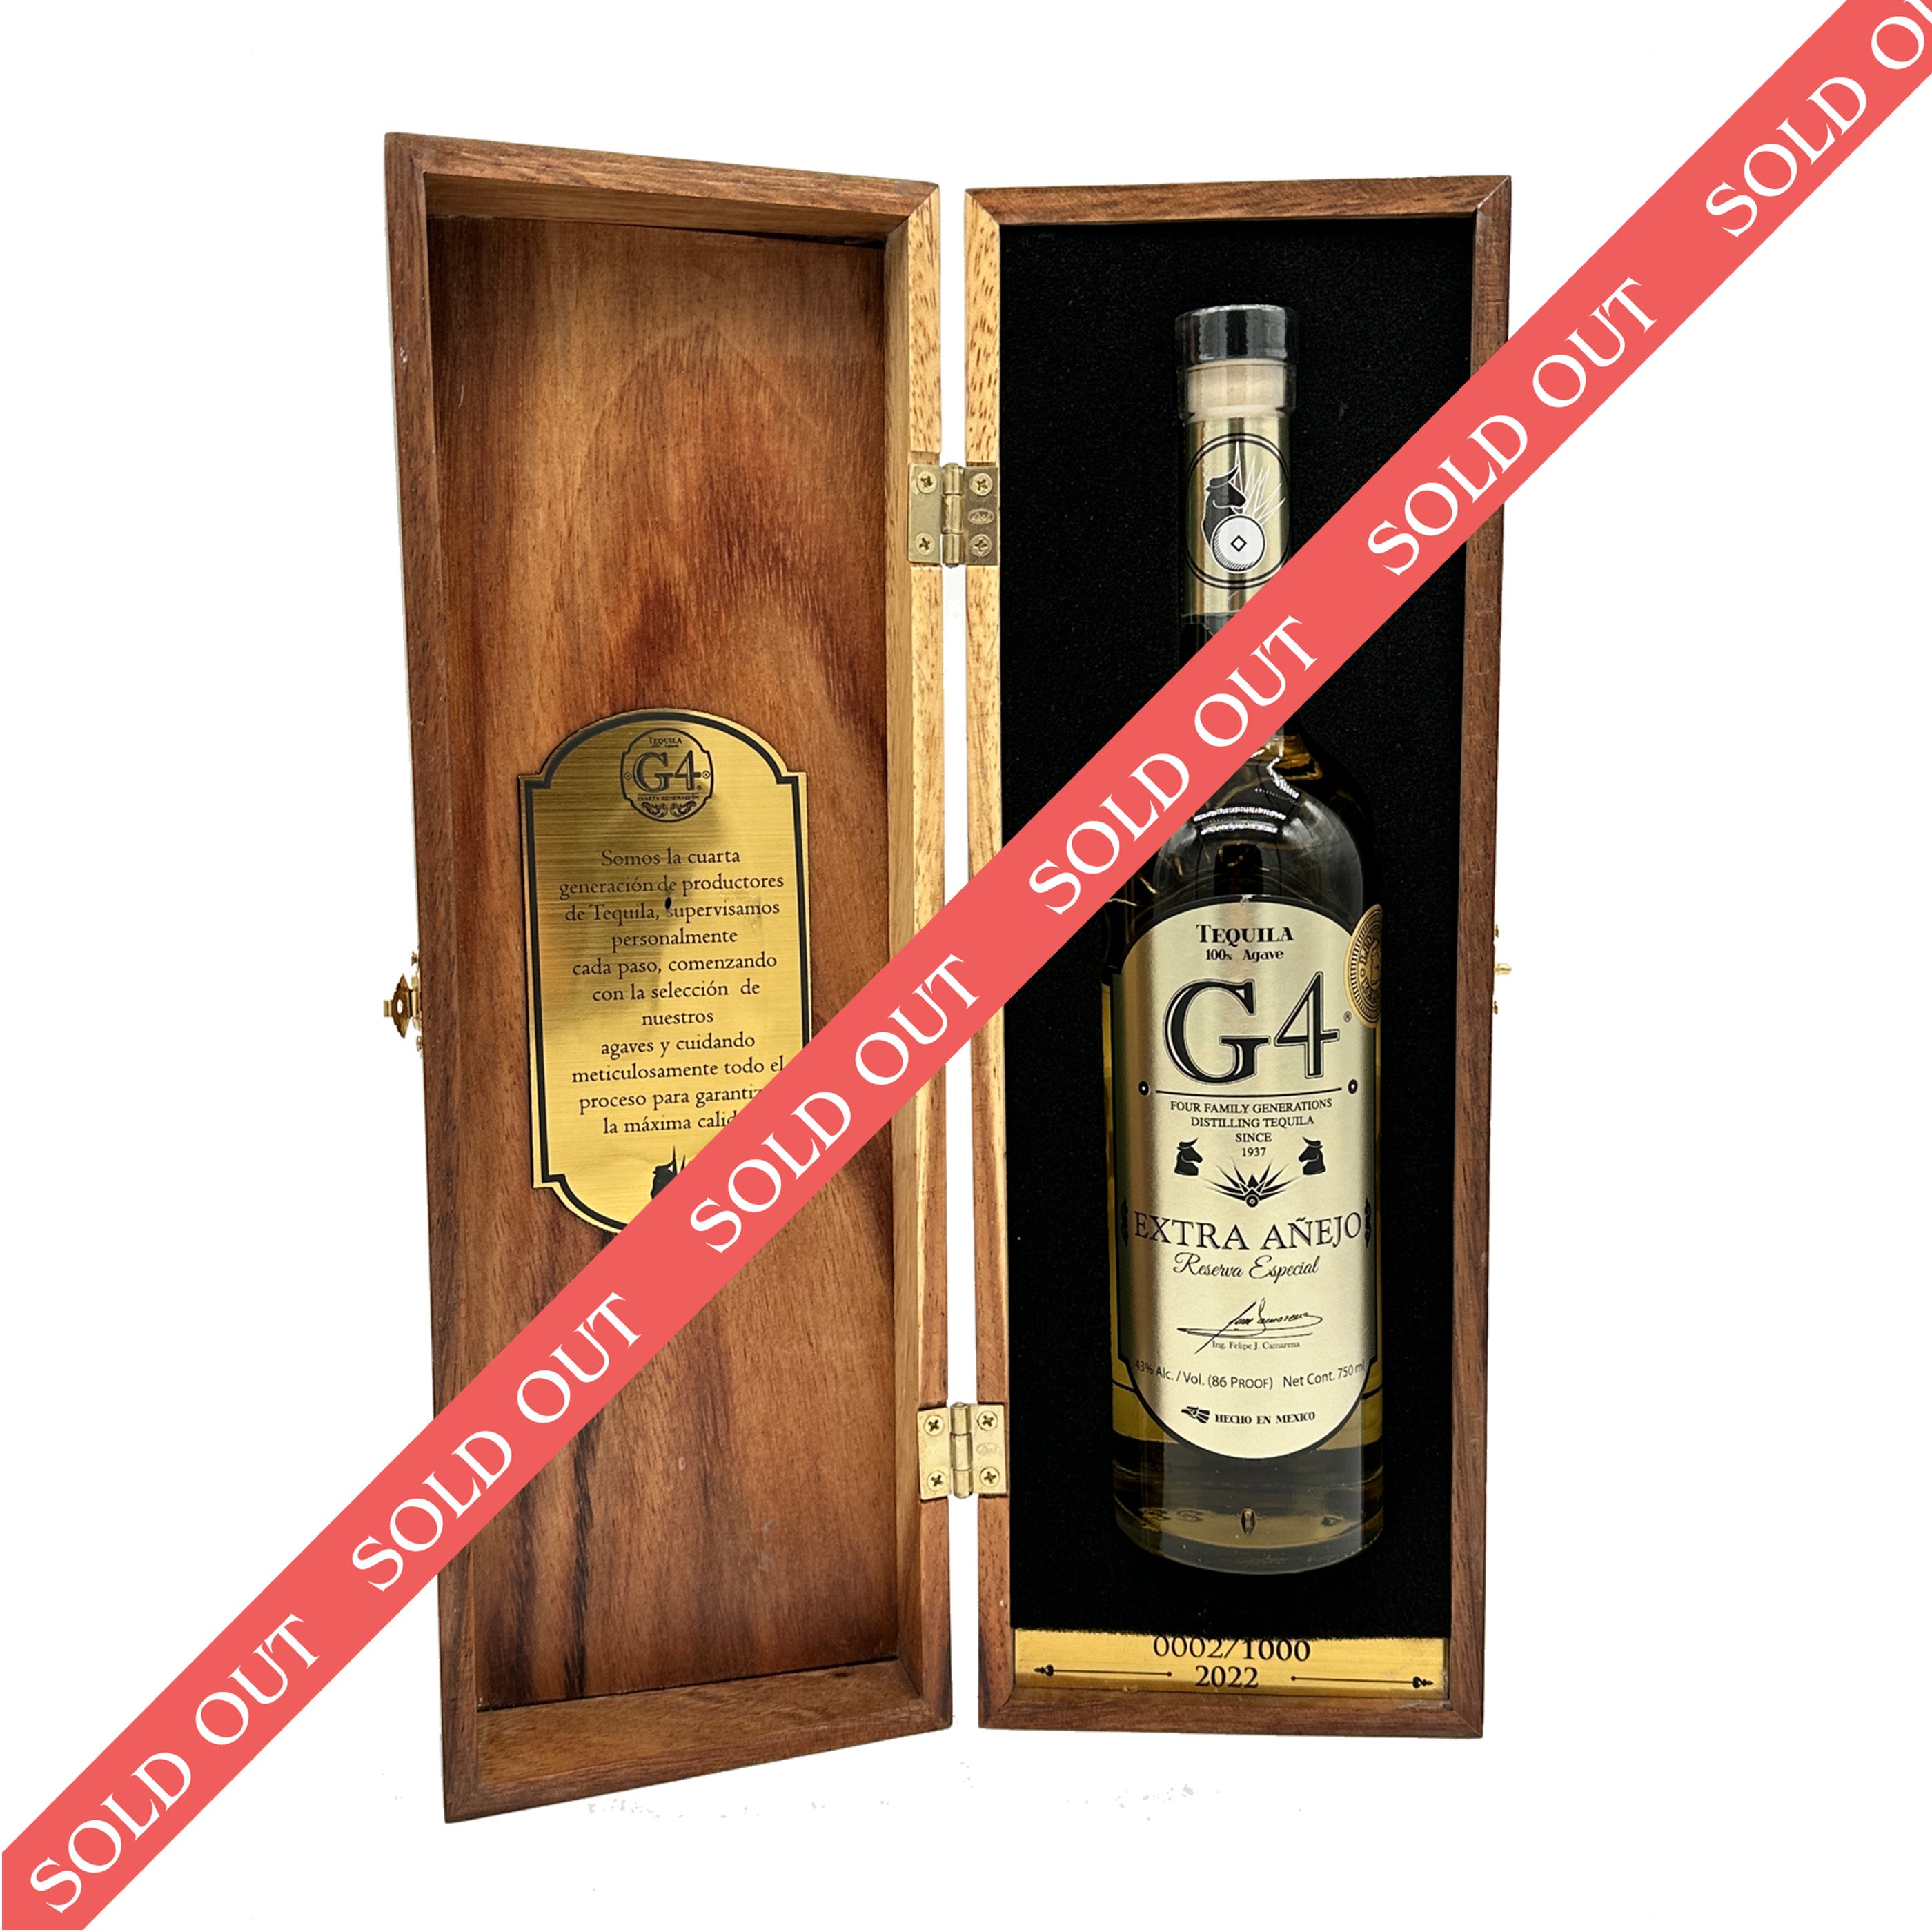 G4 Tequila 6 Year Extra Anejo Reserva Especial